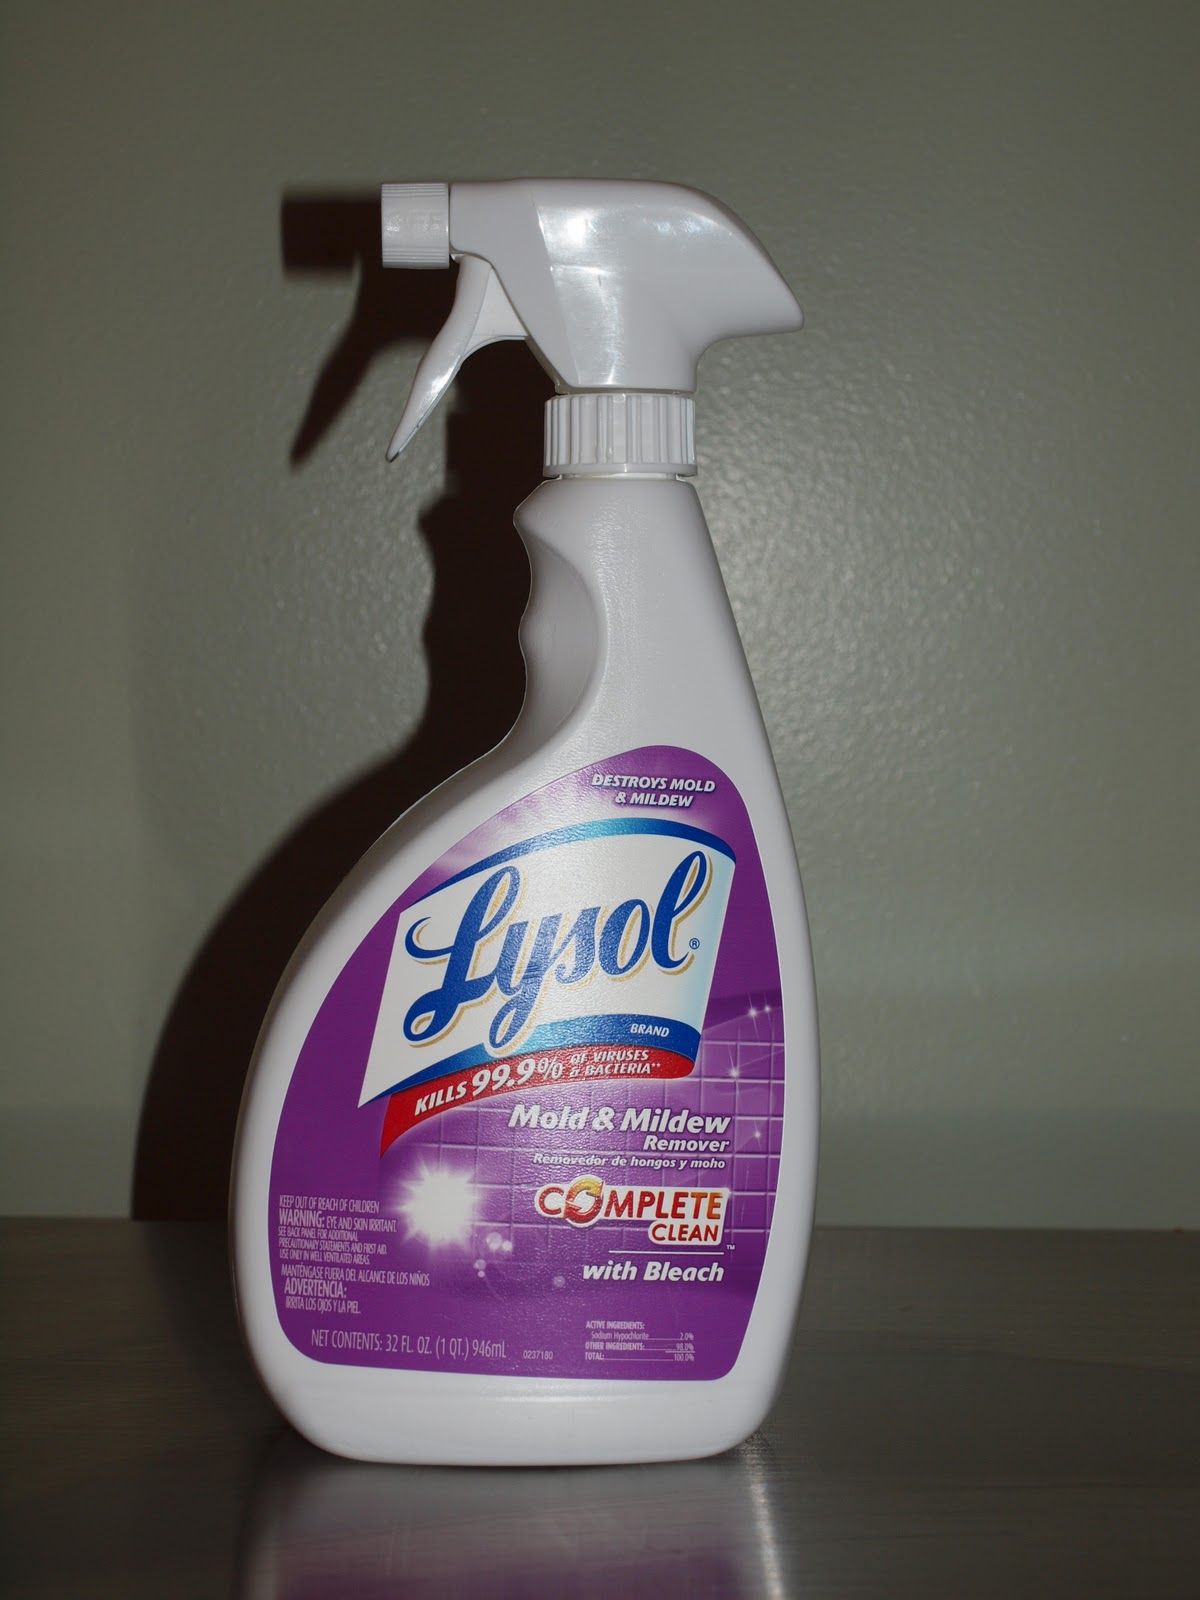 April Knows Best Lysol Brand Mold & Mildew Remover Complete Clean with Bleach